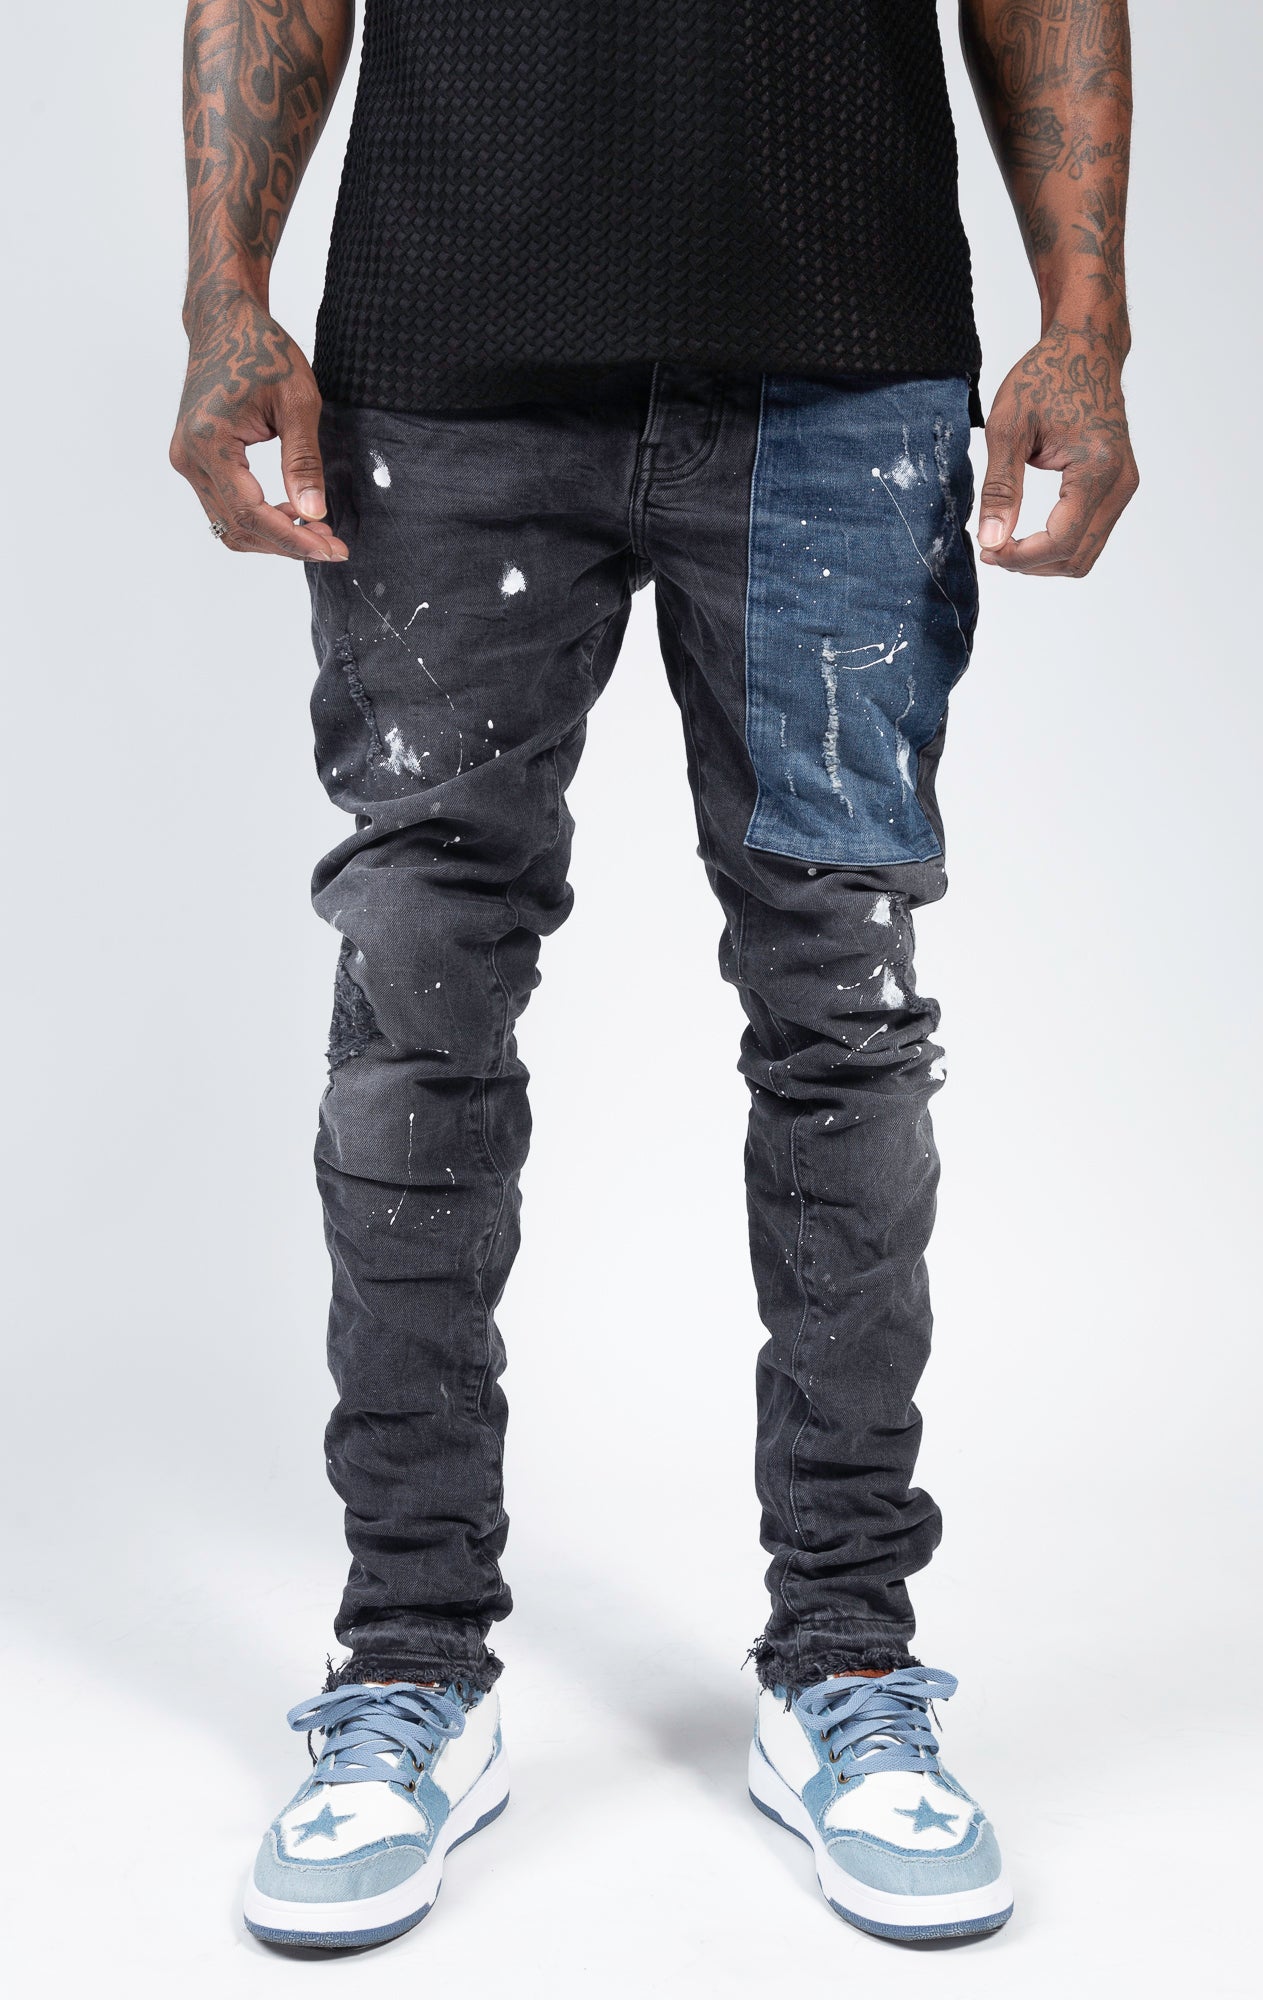 Ripped patchwork jeans with paint splatters